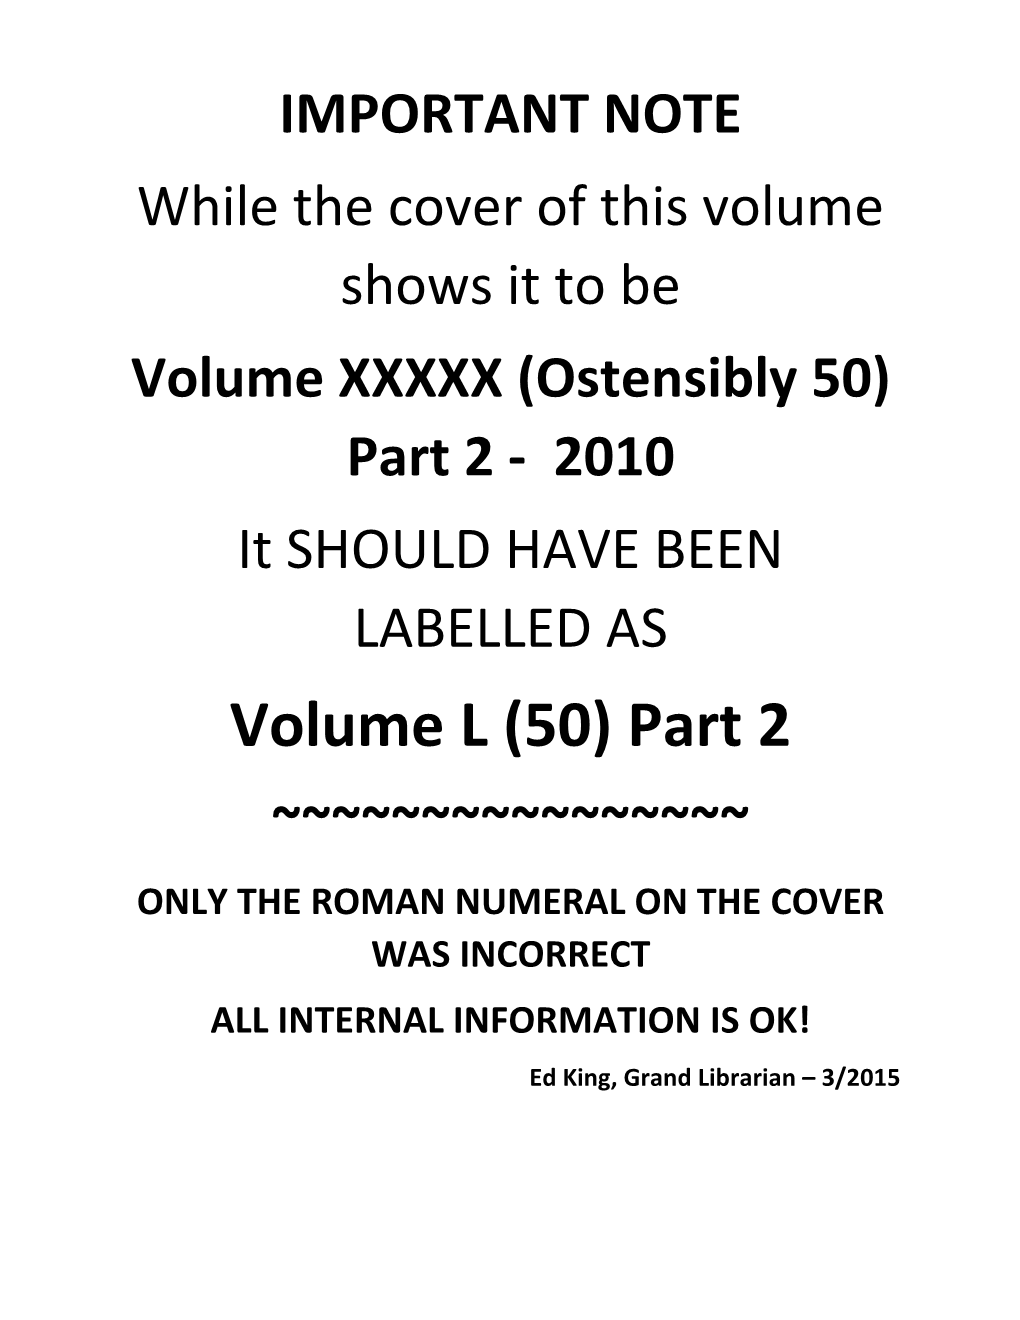 Volume L (50) Part 2 ~~~~~~~~~~~~~~~~ ONLY the ROMAN NUMERAL on the COVER WAS INCORRECT ALL INTERNAL INFORMATION IS OK! Ed King, Grand Librarian – 3/2015